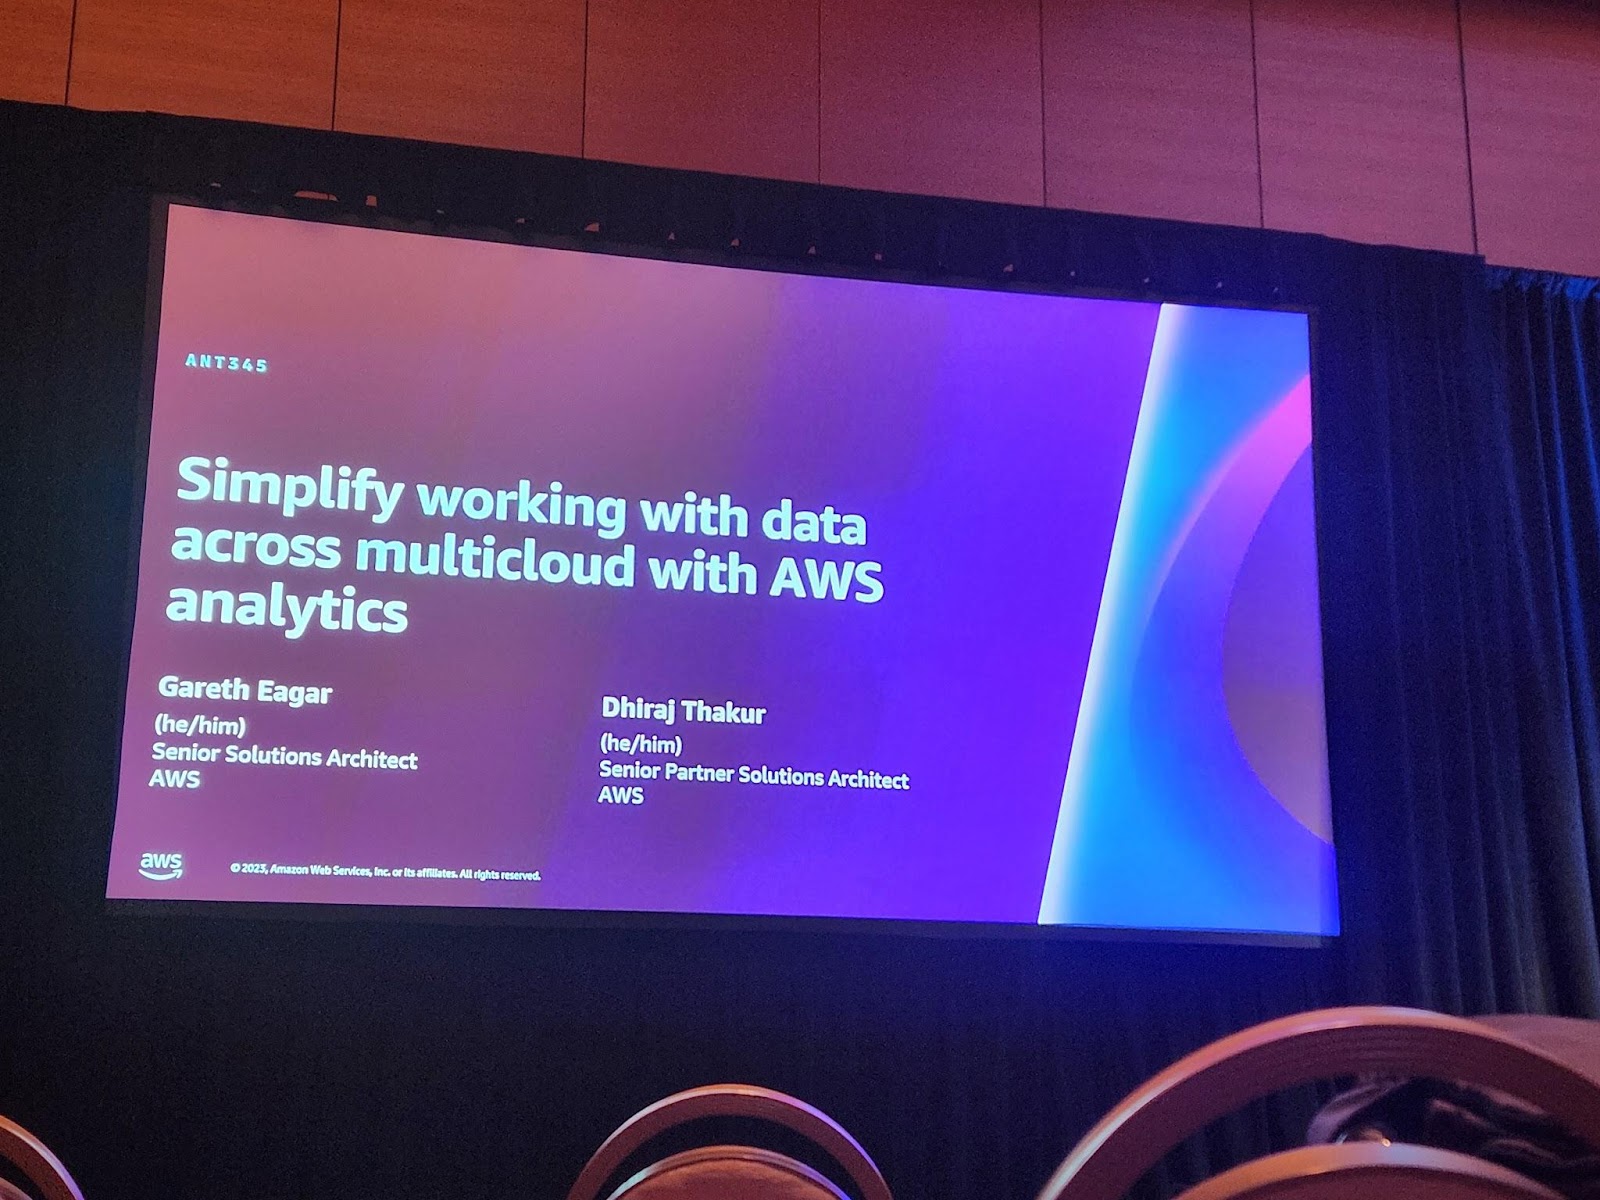 Simplify working with data acrosss multicloud with AWS analytics